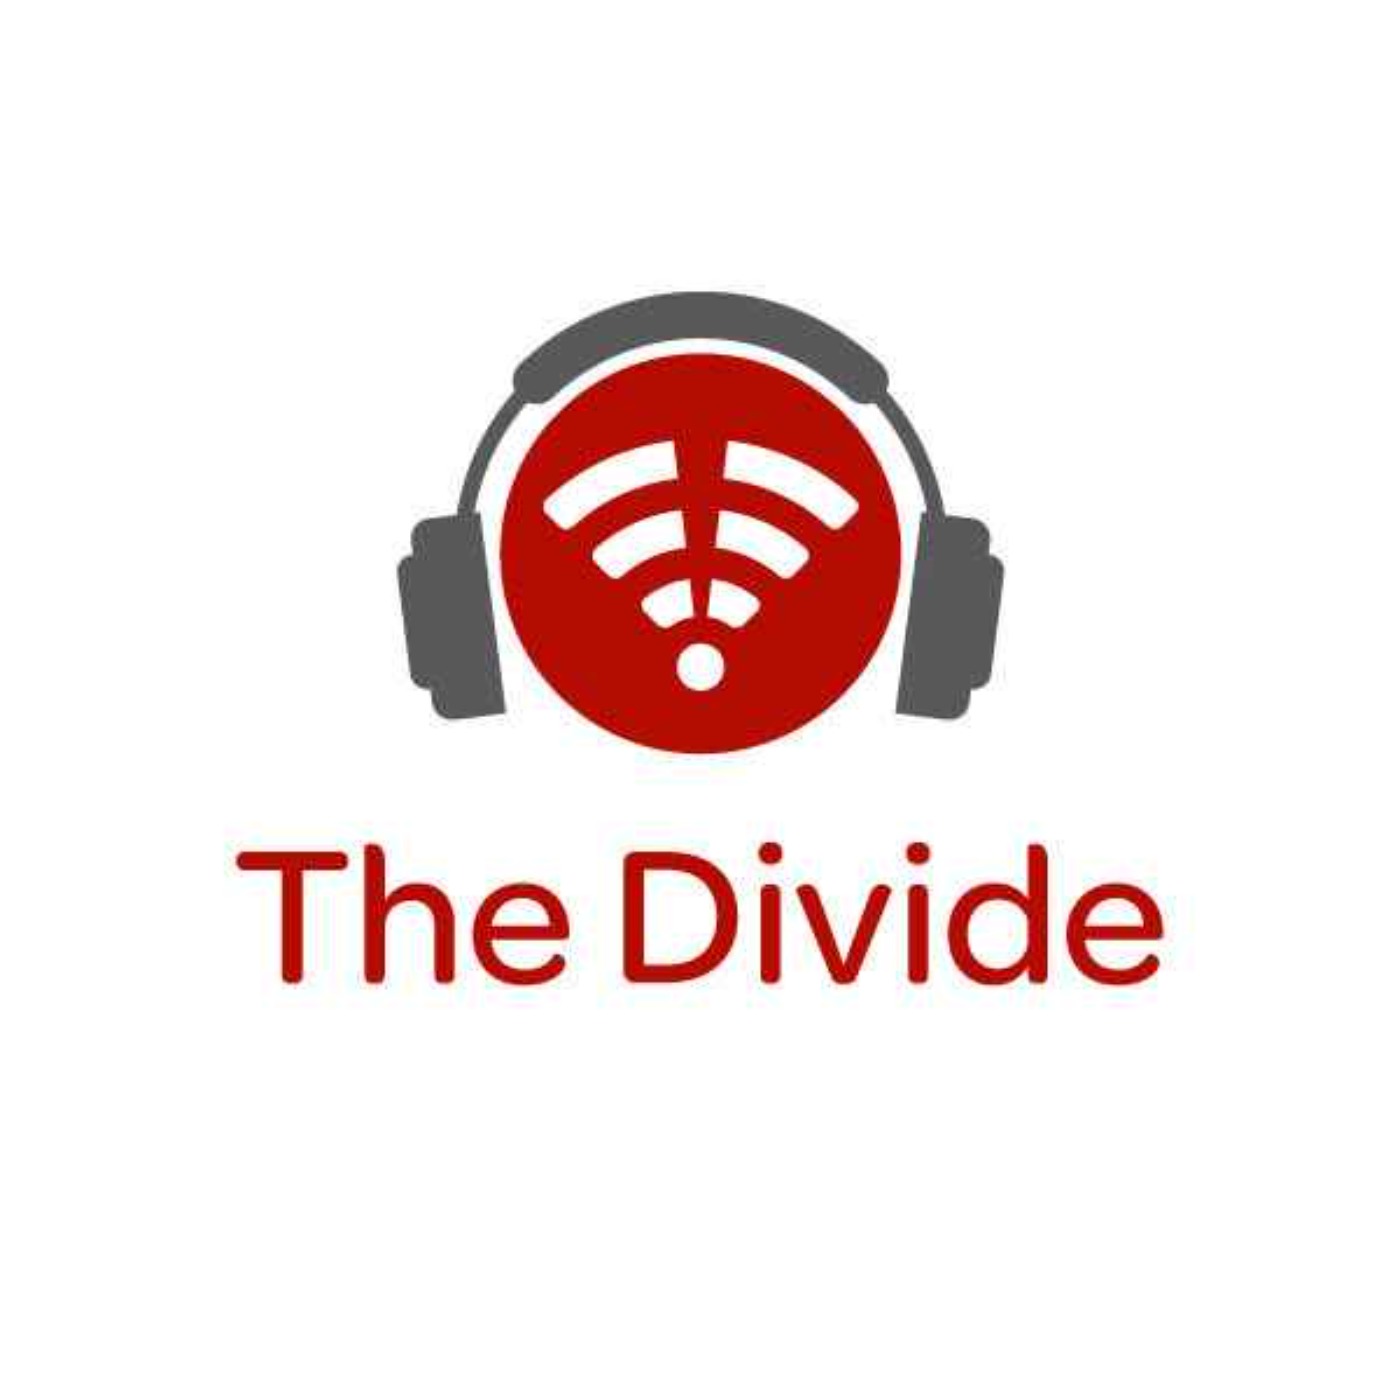 The Divide: Joey Wender on US Treasury's $10B down payment on closing the digital divide